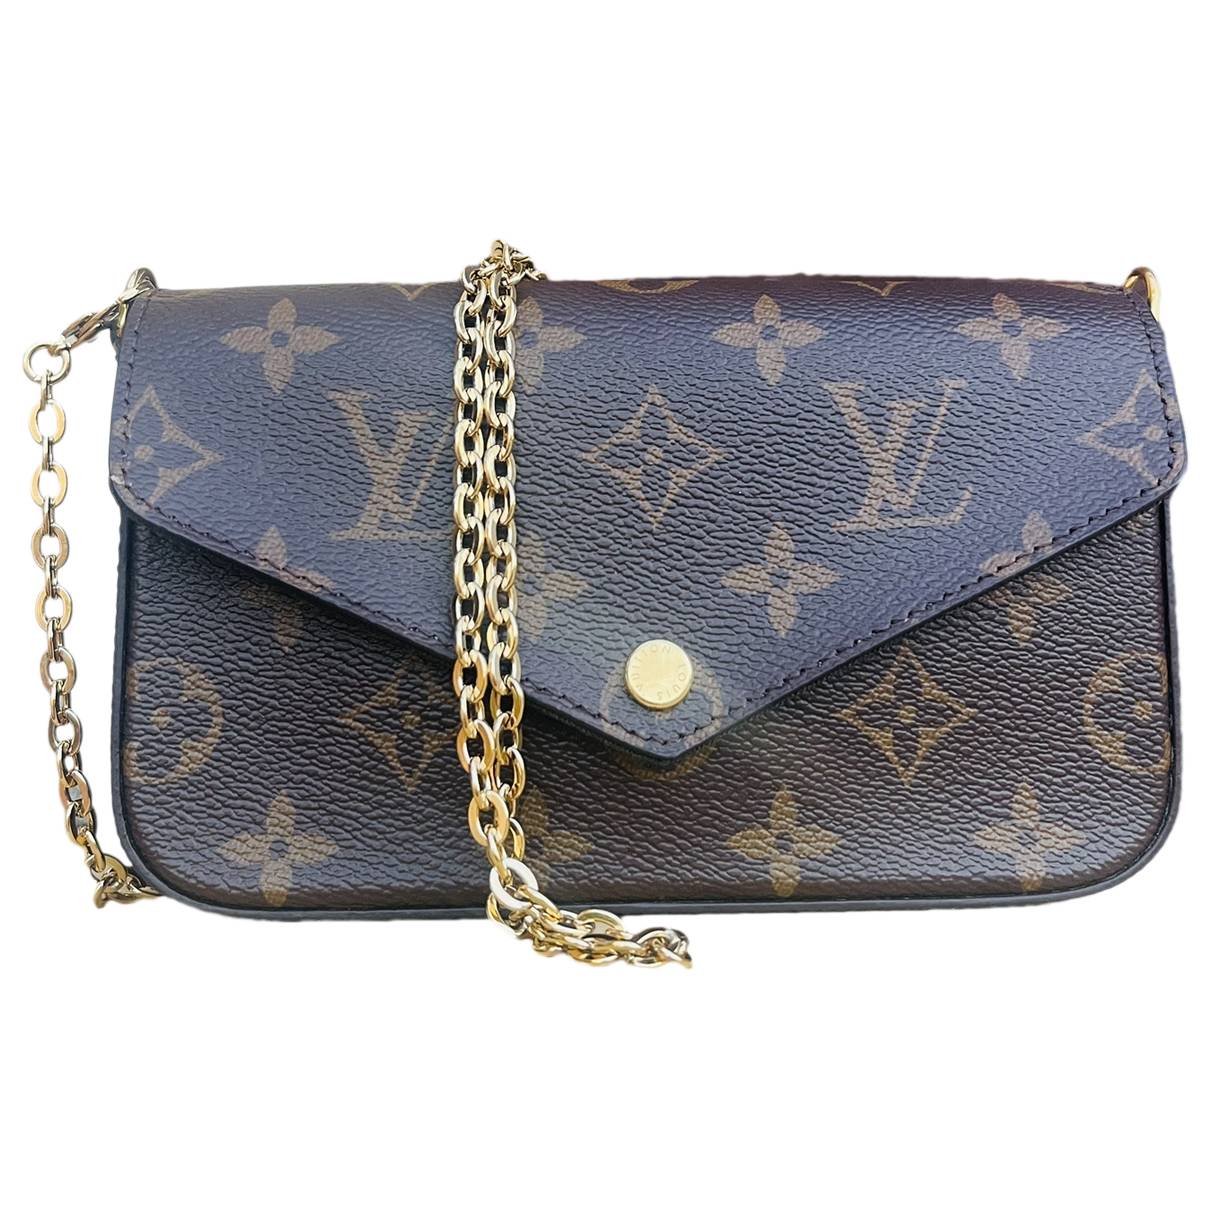 strap and go louis vuittons handbags